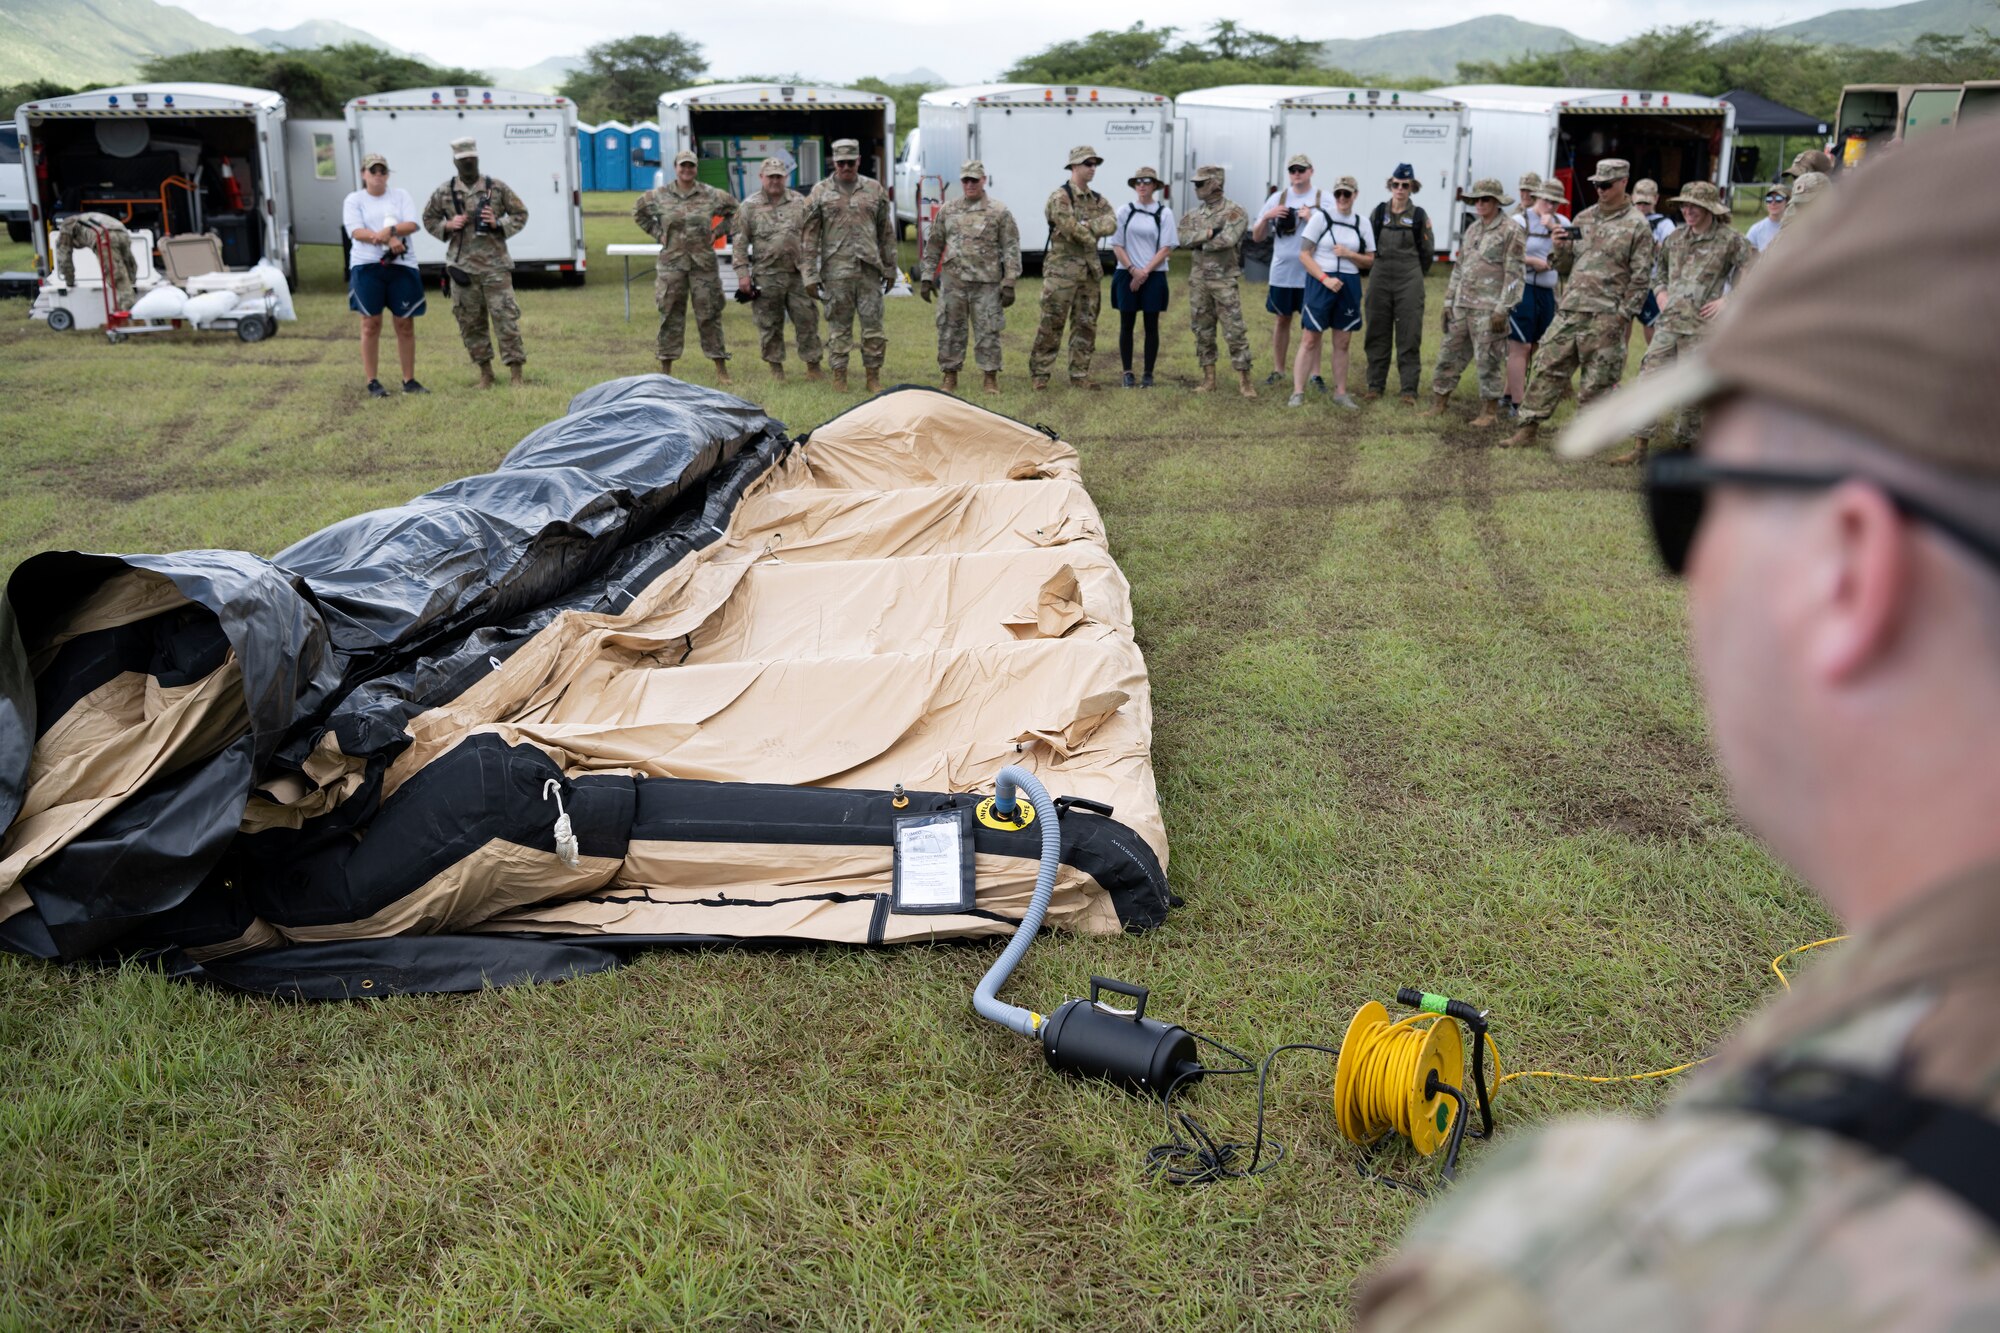 U.S. Airmen assigned to the Kentucky Air National Guard's 123rd Medical Group, Detachment 1, assemble an inflatable tent during a collective training exercise at Camp Santiago Joint Training Center, Salinas, Puerto Rico, Aug. 10, 2023. The exercise allowed service members assigned to the 156th Medical Group, 123rd Medical Group and the Puerto Rico Army National Guard to exchange knowledge and implement the National Guard CBRN Response Enterprise Information Management System, which assists with accelerating data collection from search and extraction teams in emergency events. (U.S. Air National Guard photo by Master Sgt. Rafael D. Rosa)